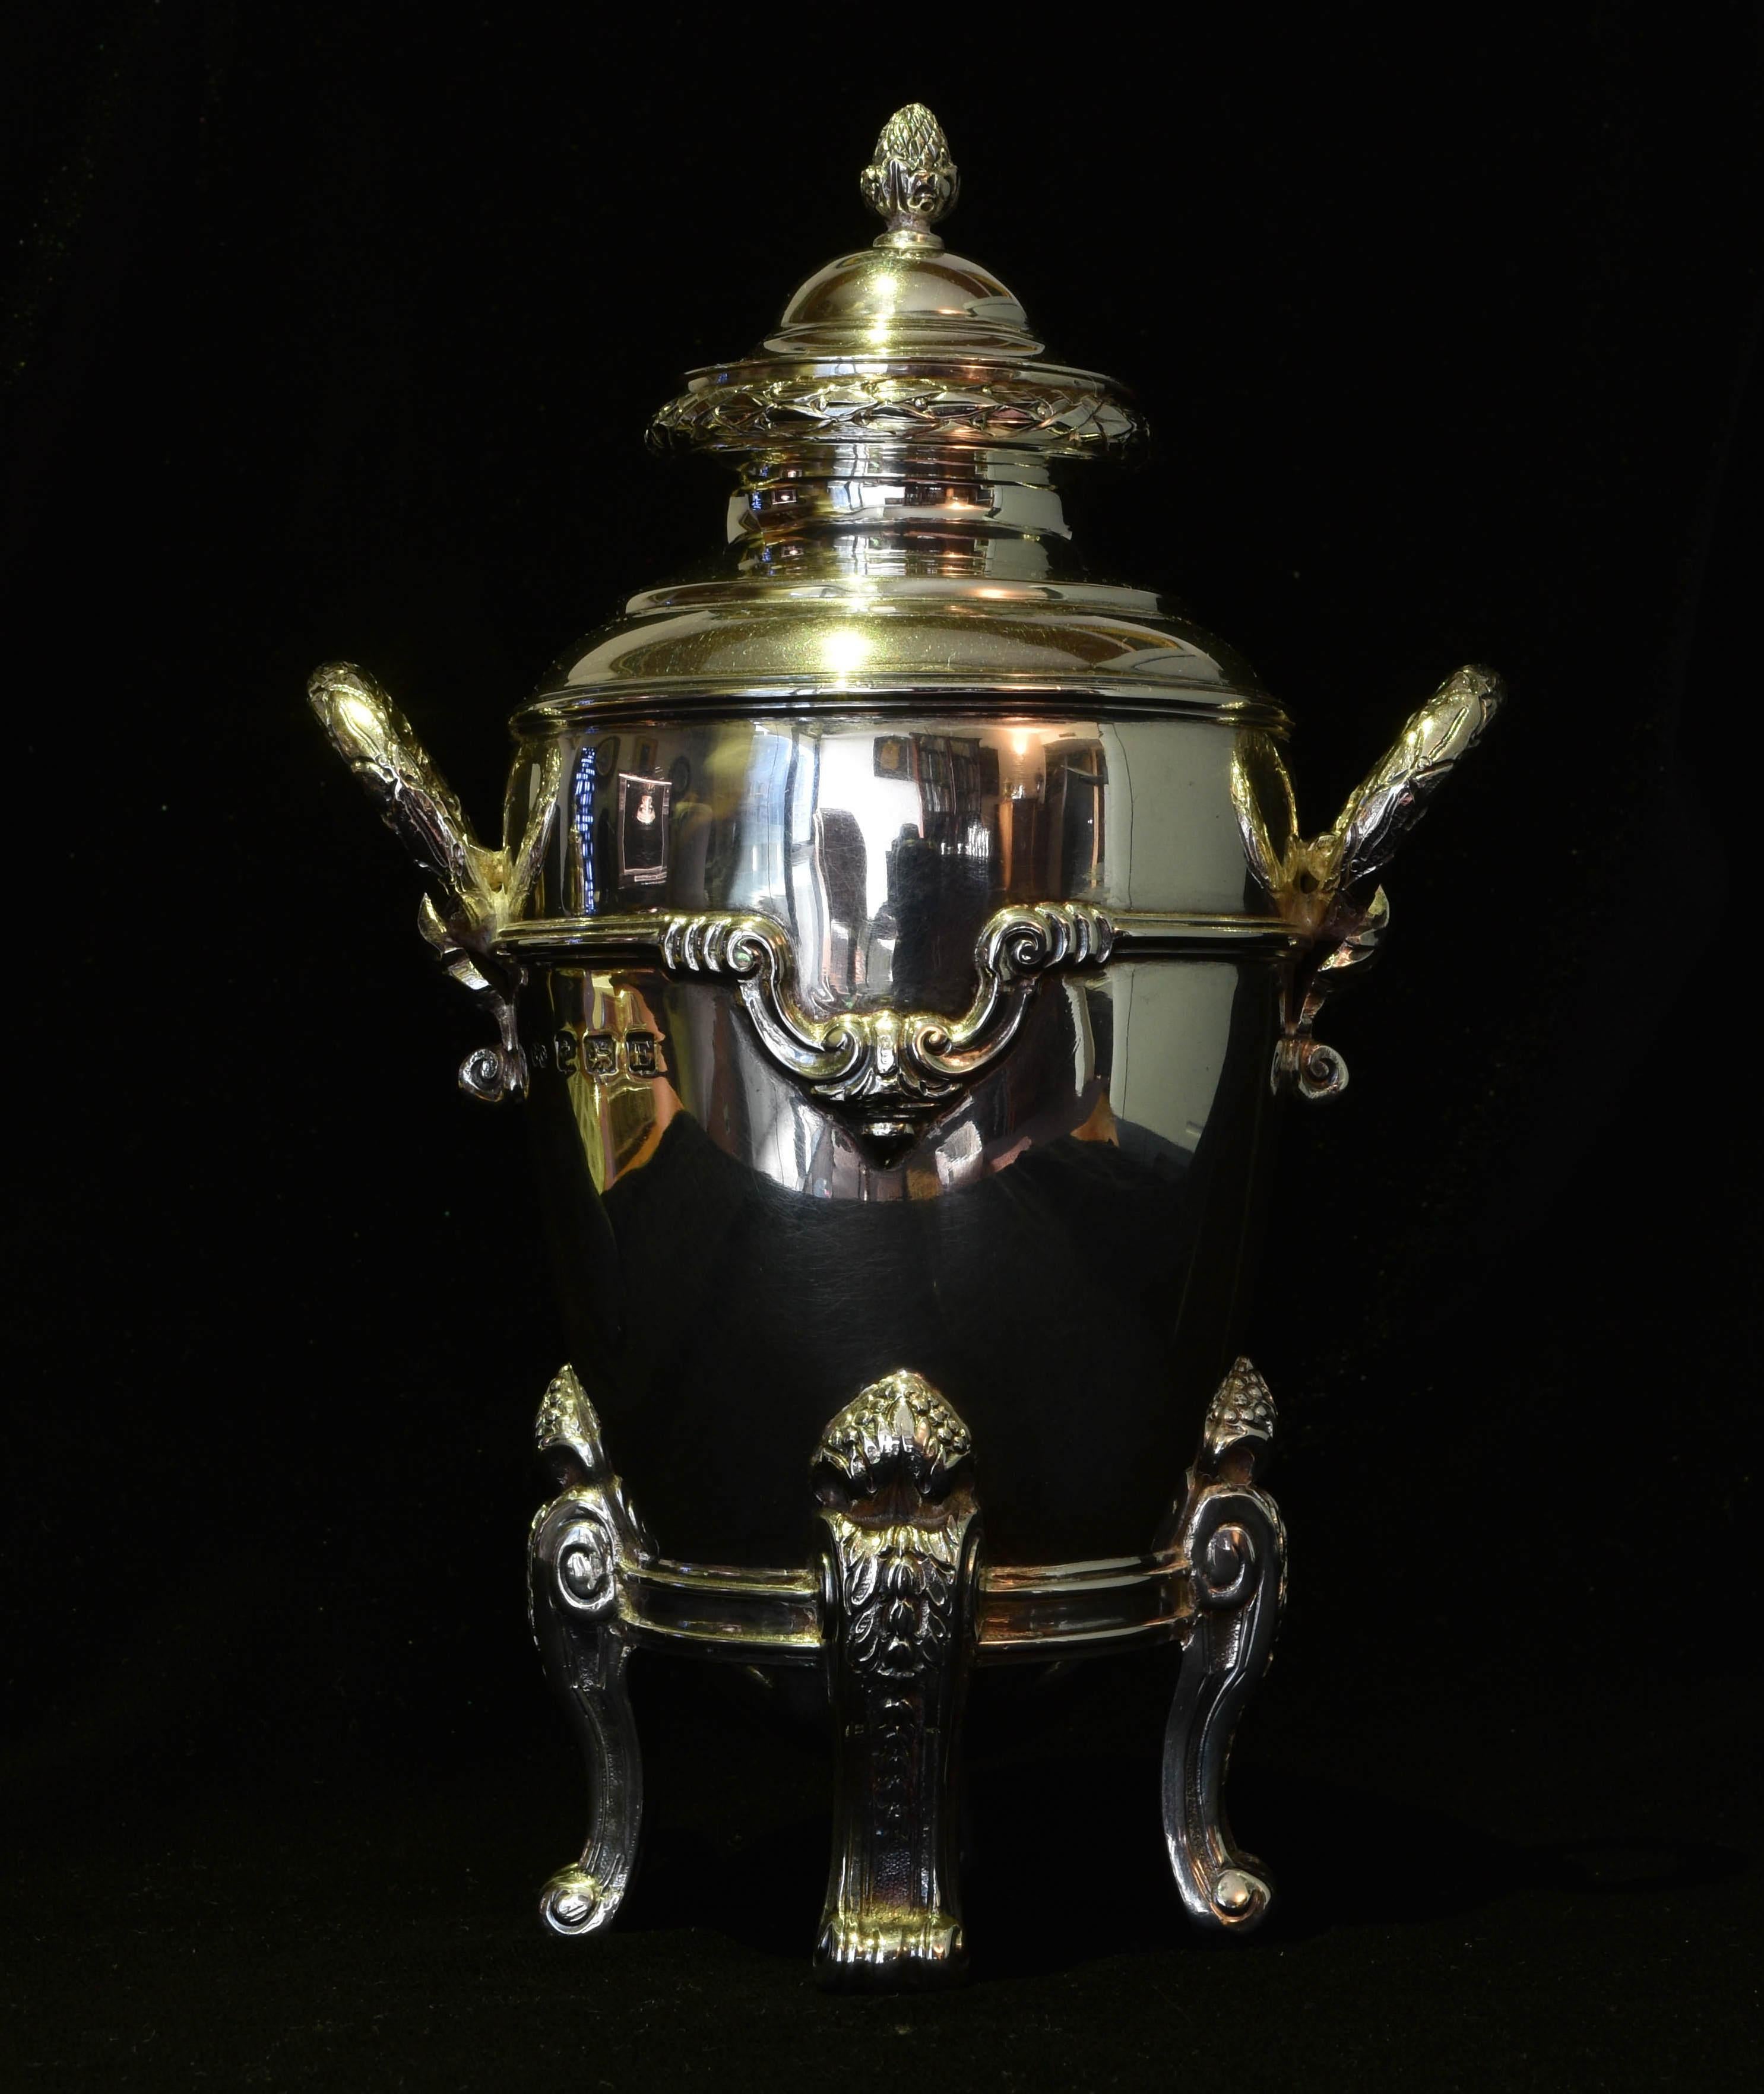 A splendid tea canister the neoclassical style, by Elkington, one of the best of teh English silversmiths of the period. The work is deep, crisp and detailed, and the item is in excellent condition.

Fully hallmarked.